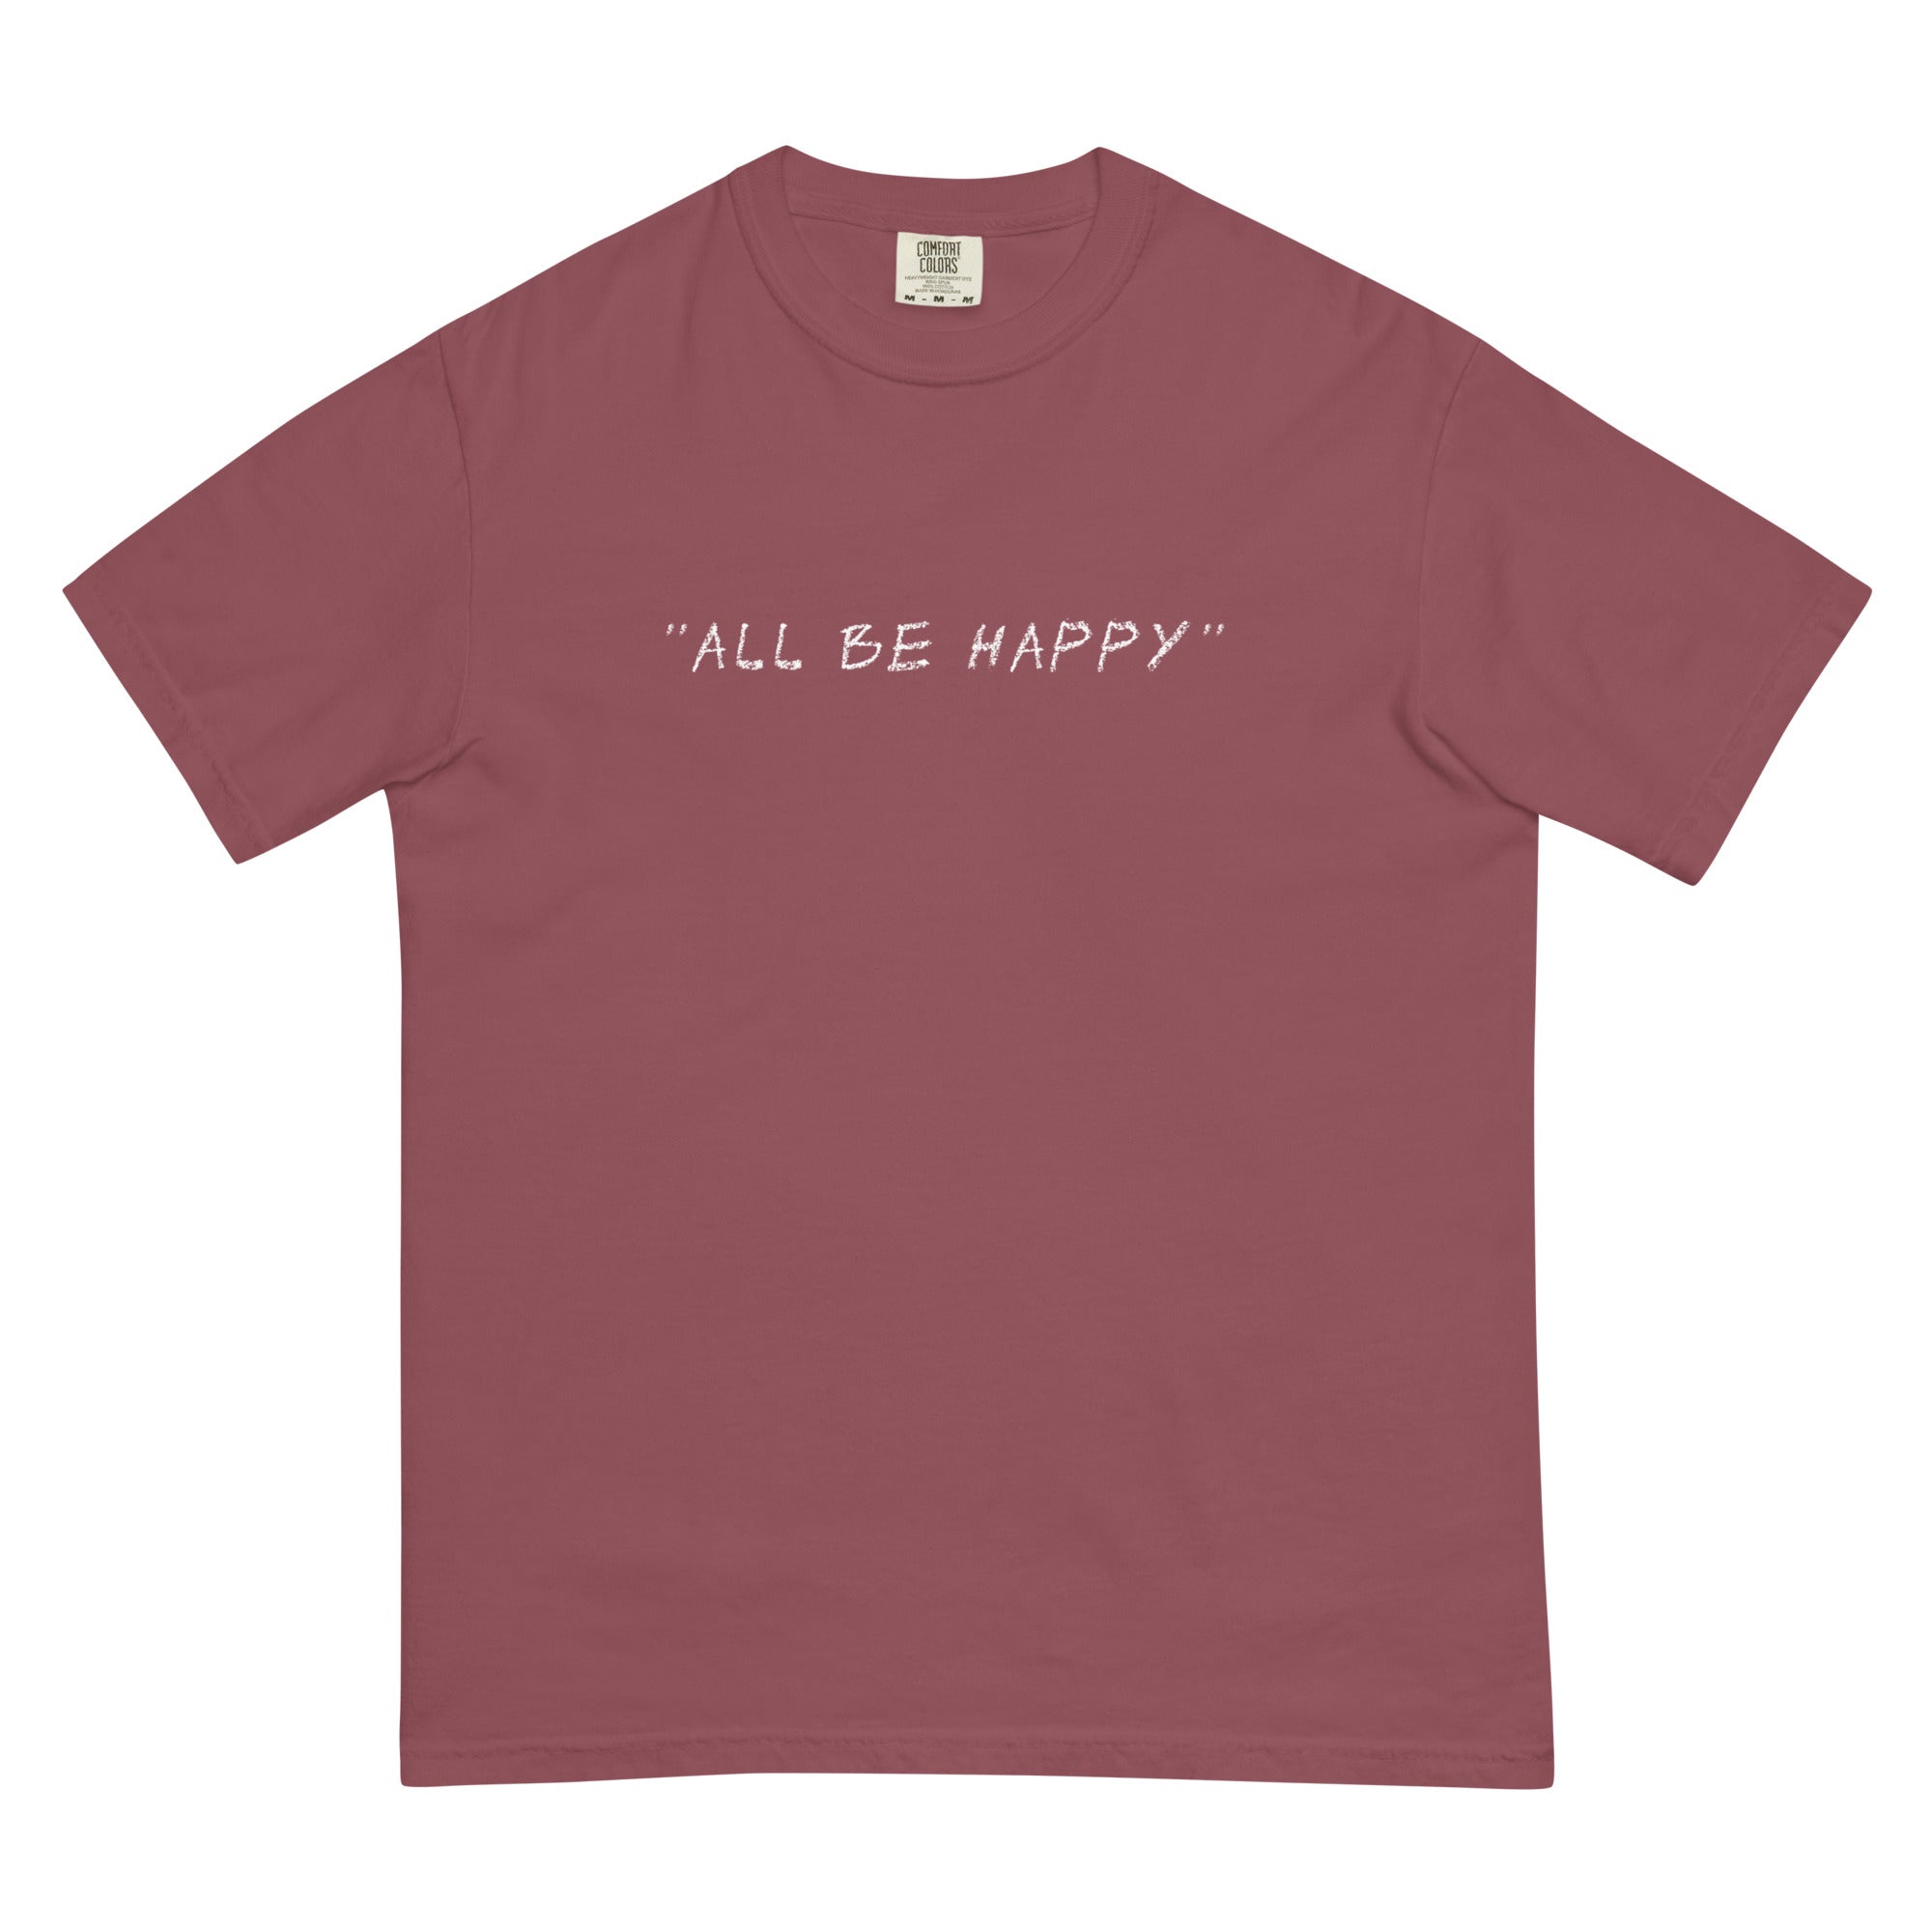 All Be Happy Heritage Garment-Dyed Tee - Laughing Man Coffee